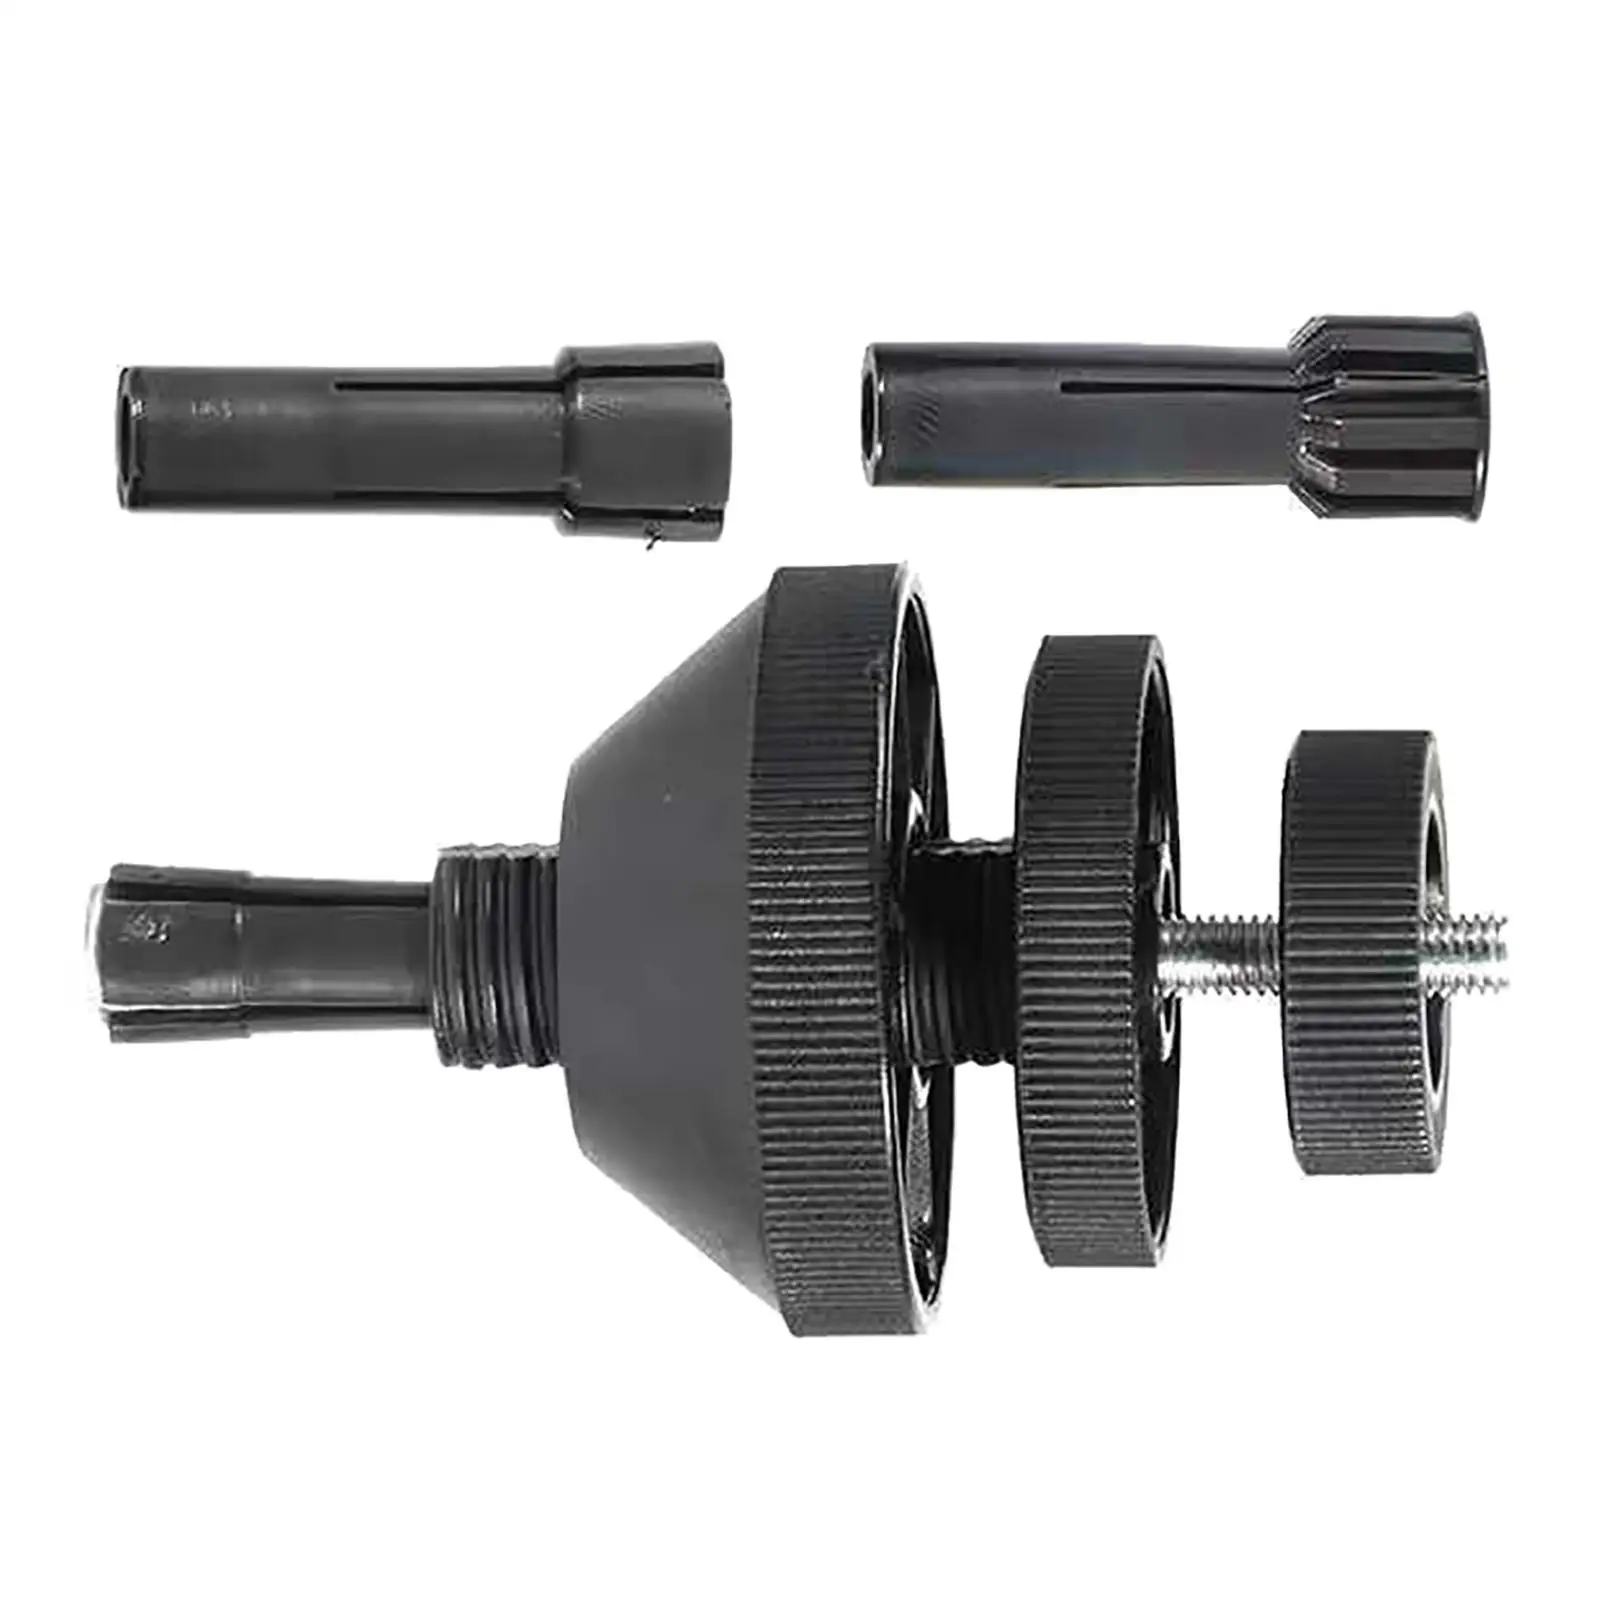 Clutch Alignment Centering Tool Universal Clutch Aligning Kit Fit for Car Repair